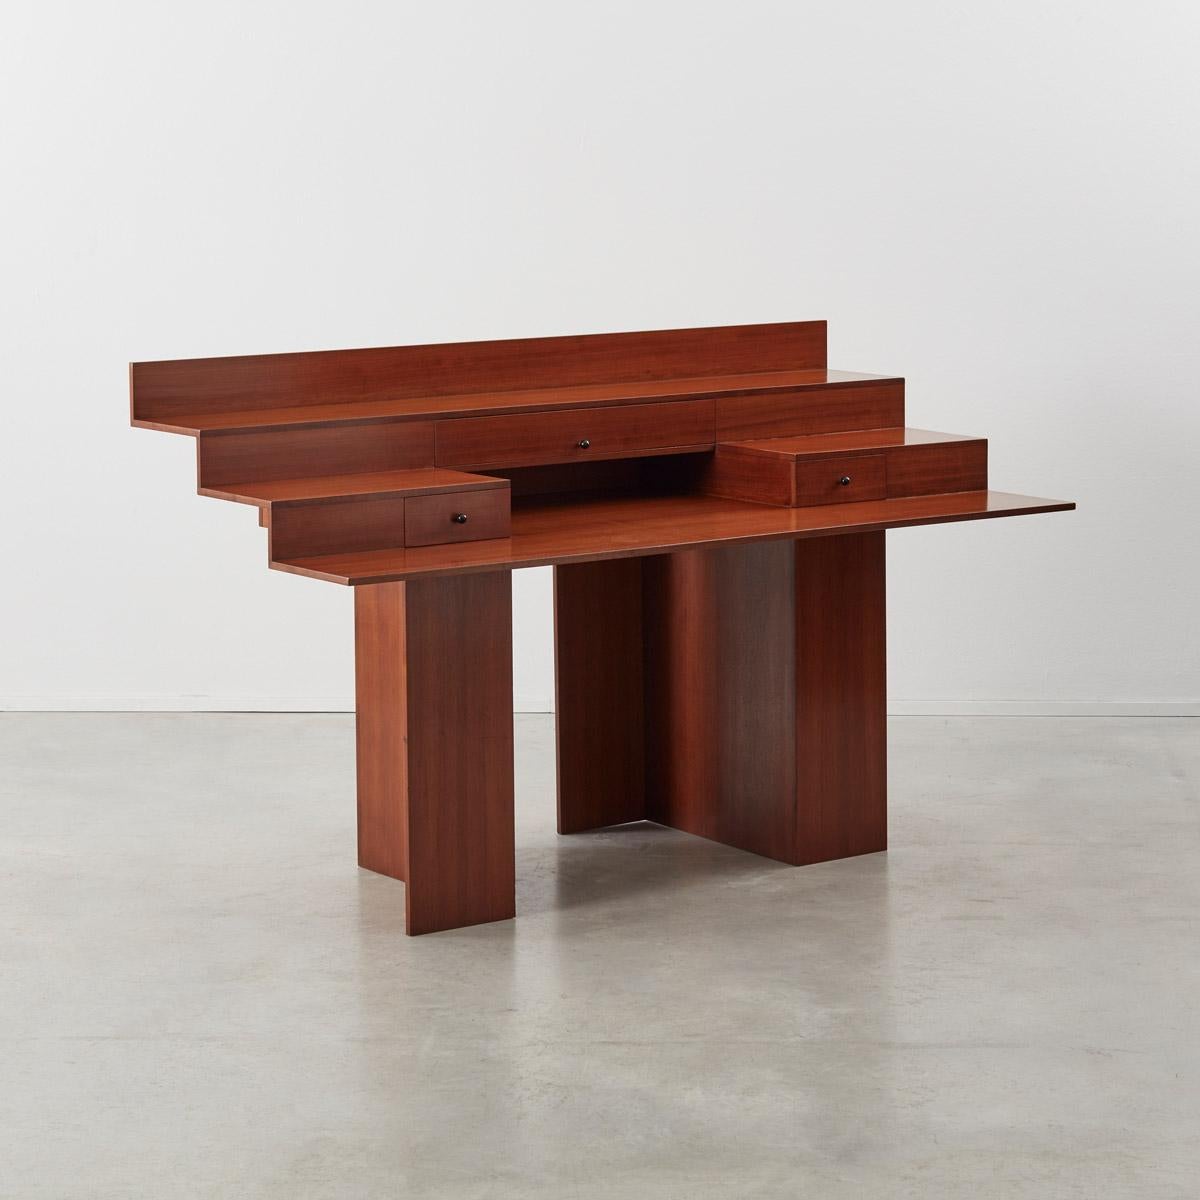 Compasso d’oro winning Architect-designers Marcello Vecchi and Francesco Trabucco, collaborated on this desk in 1983 for Poggi, Pavia, 1983. The Italian maker Poggi (1924-) was famous for championing the designs of other notable architects, the